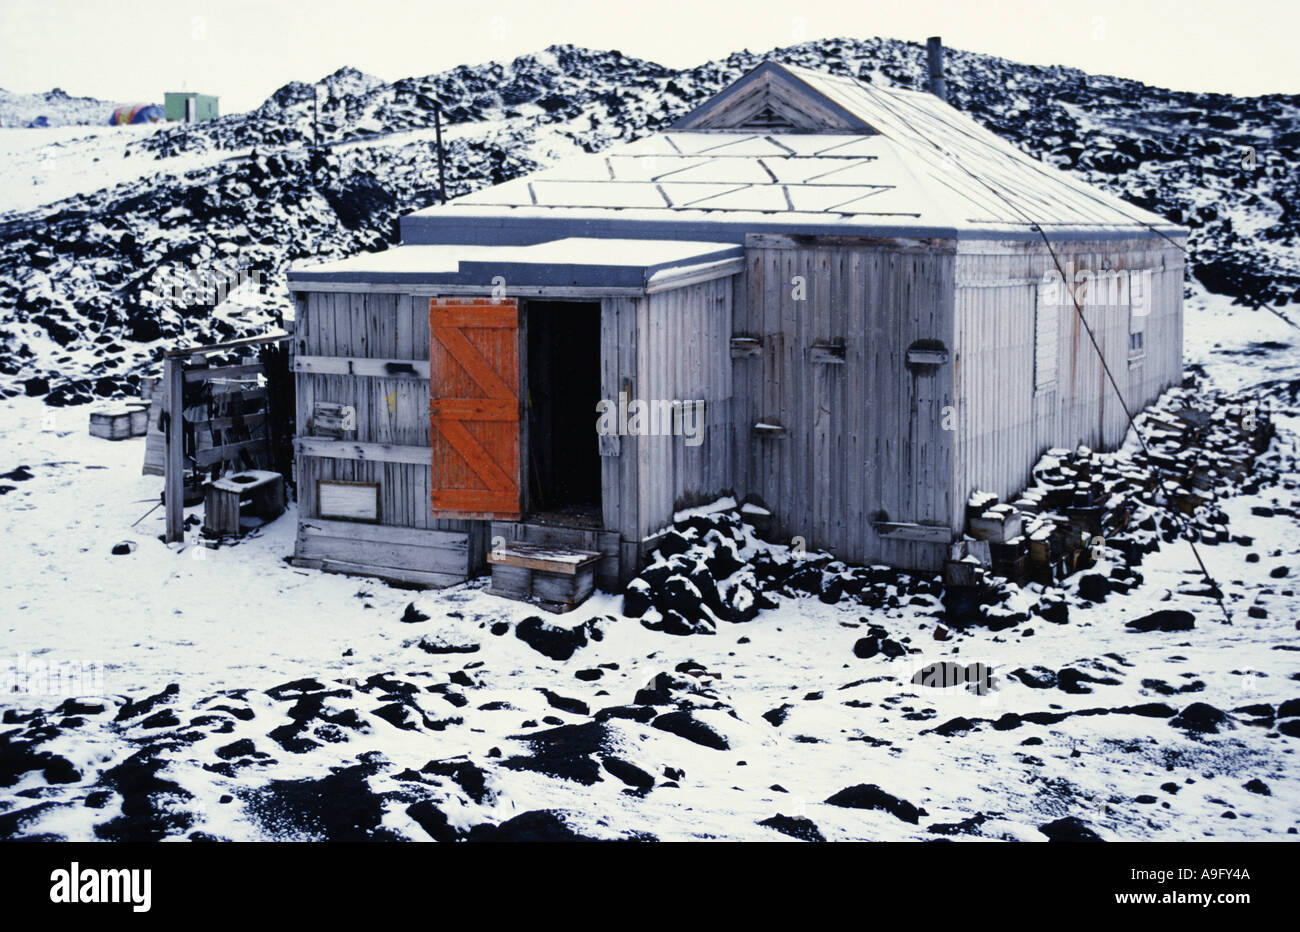 hut o f the british Antarctic expedition 1907-1909, Nimrod expedition, under ther leadingship of Ernest Shackleton, Antarctica, Stock Photo